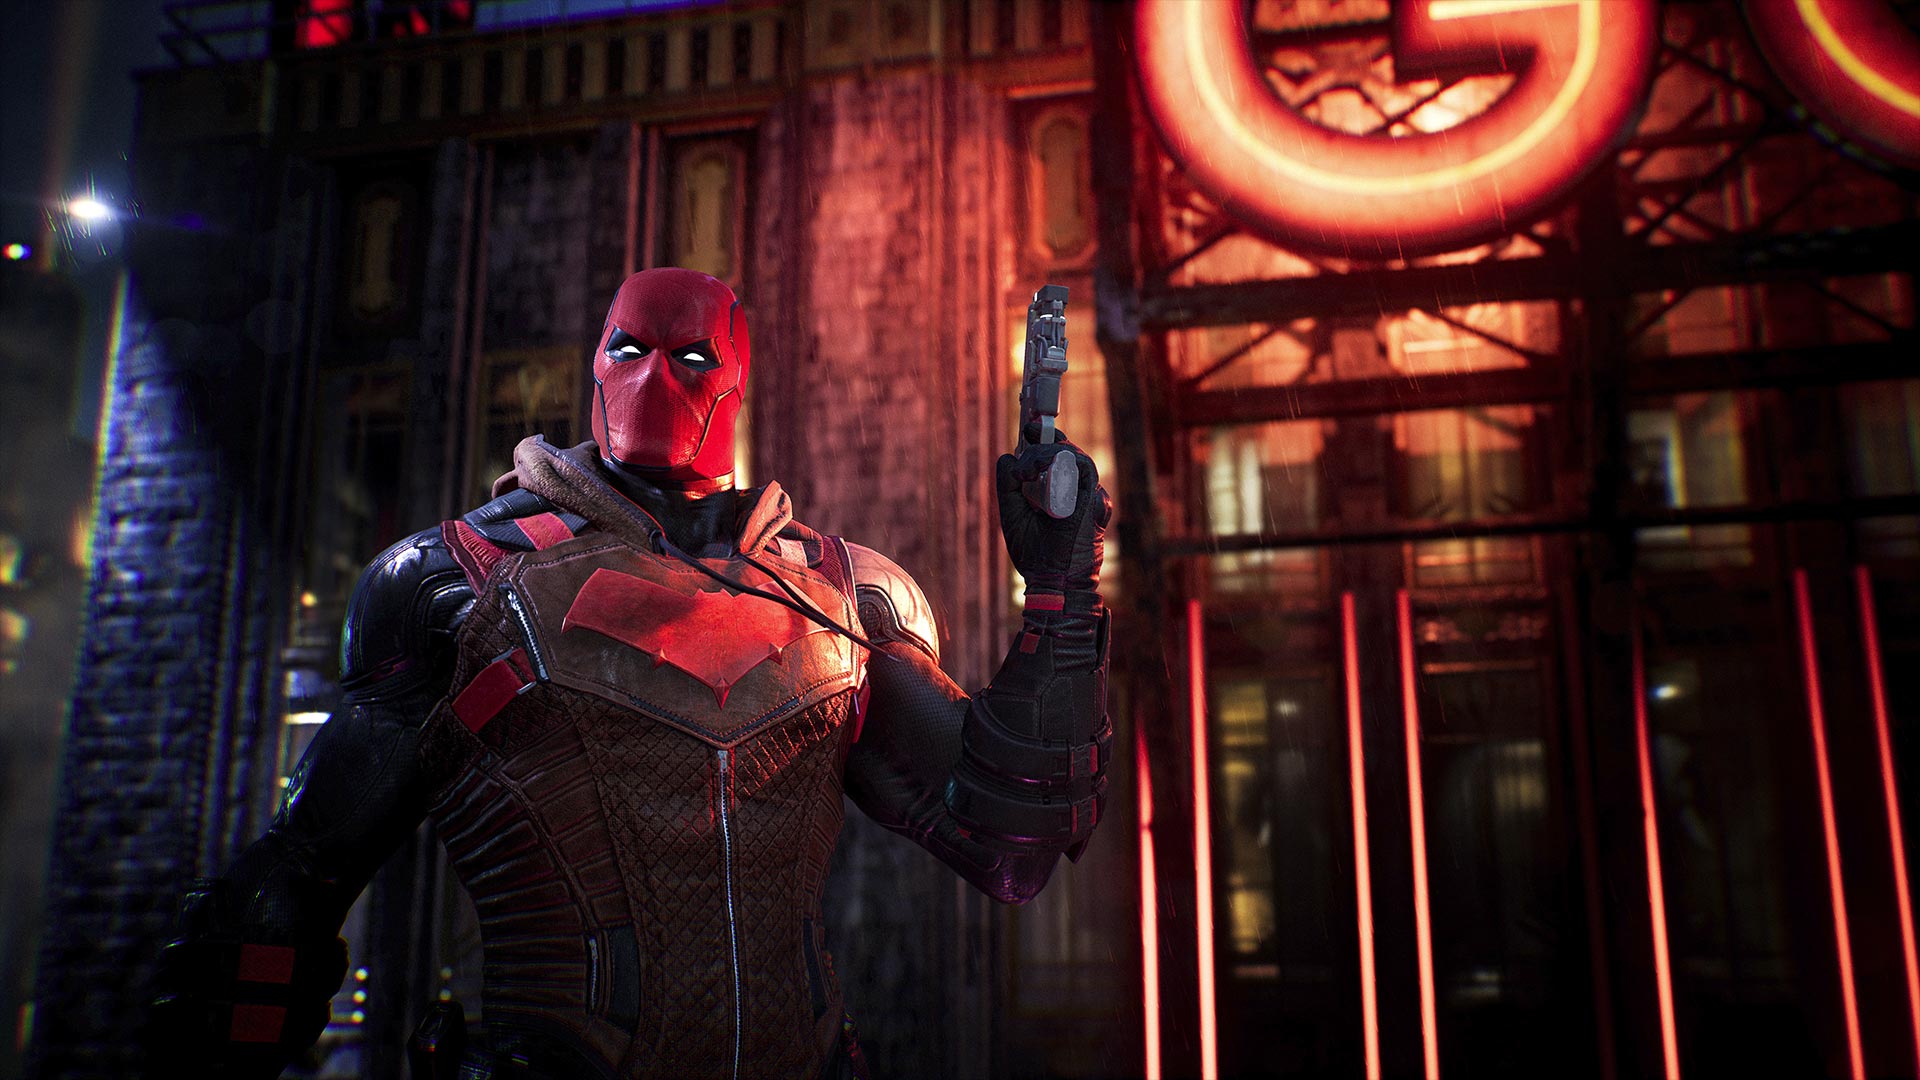 New 'Gotham Knights' gameplay shows off Nightwing and Red Hood